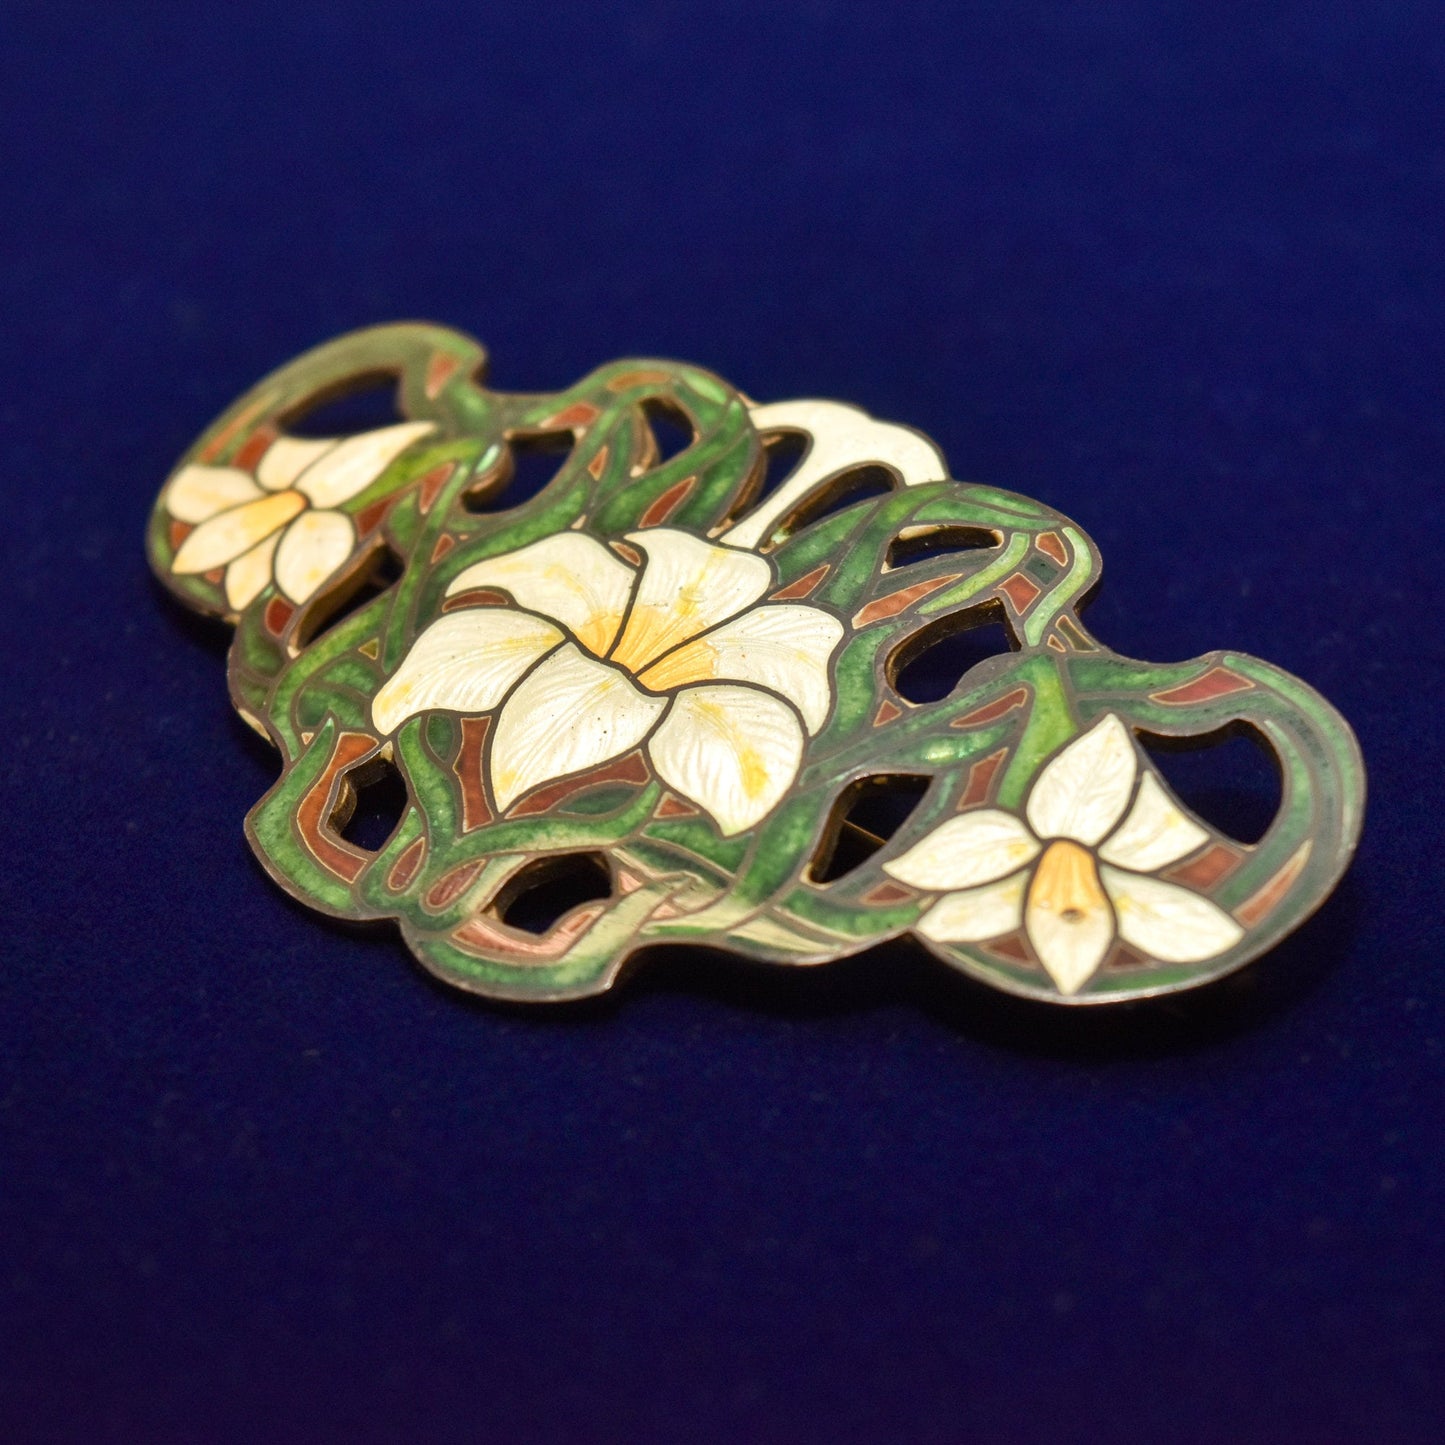 Sheffield Sterling Silver Guilloche Enamel Lily Brooch, Art Nouveau Jewelry, Valentines Day Gift, 2.875"